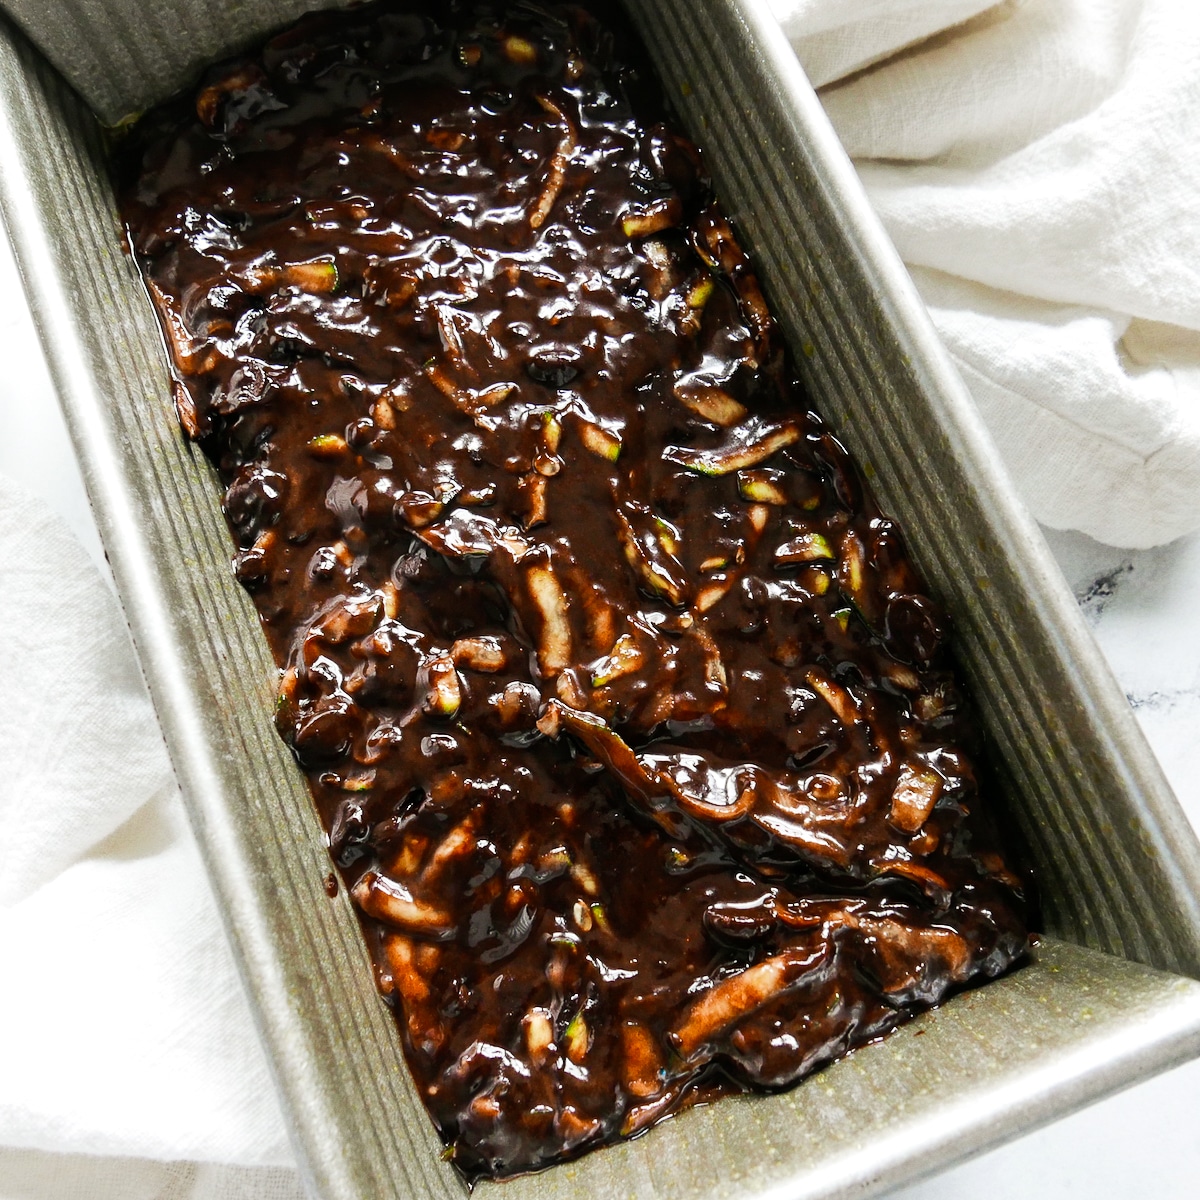 Chocolate zucchini batter spread into prepared loaf pan.